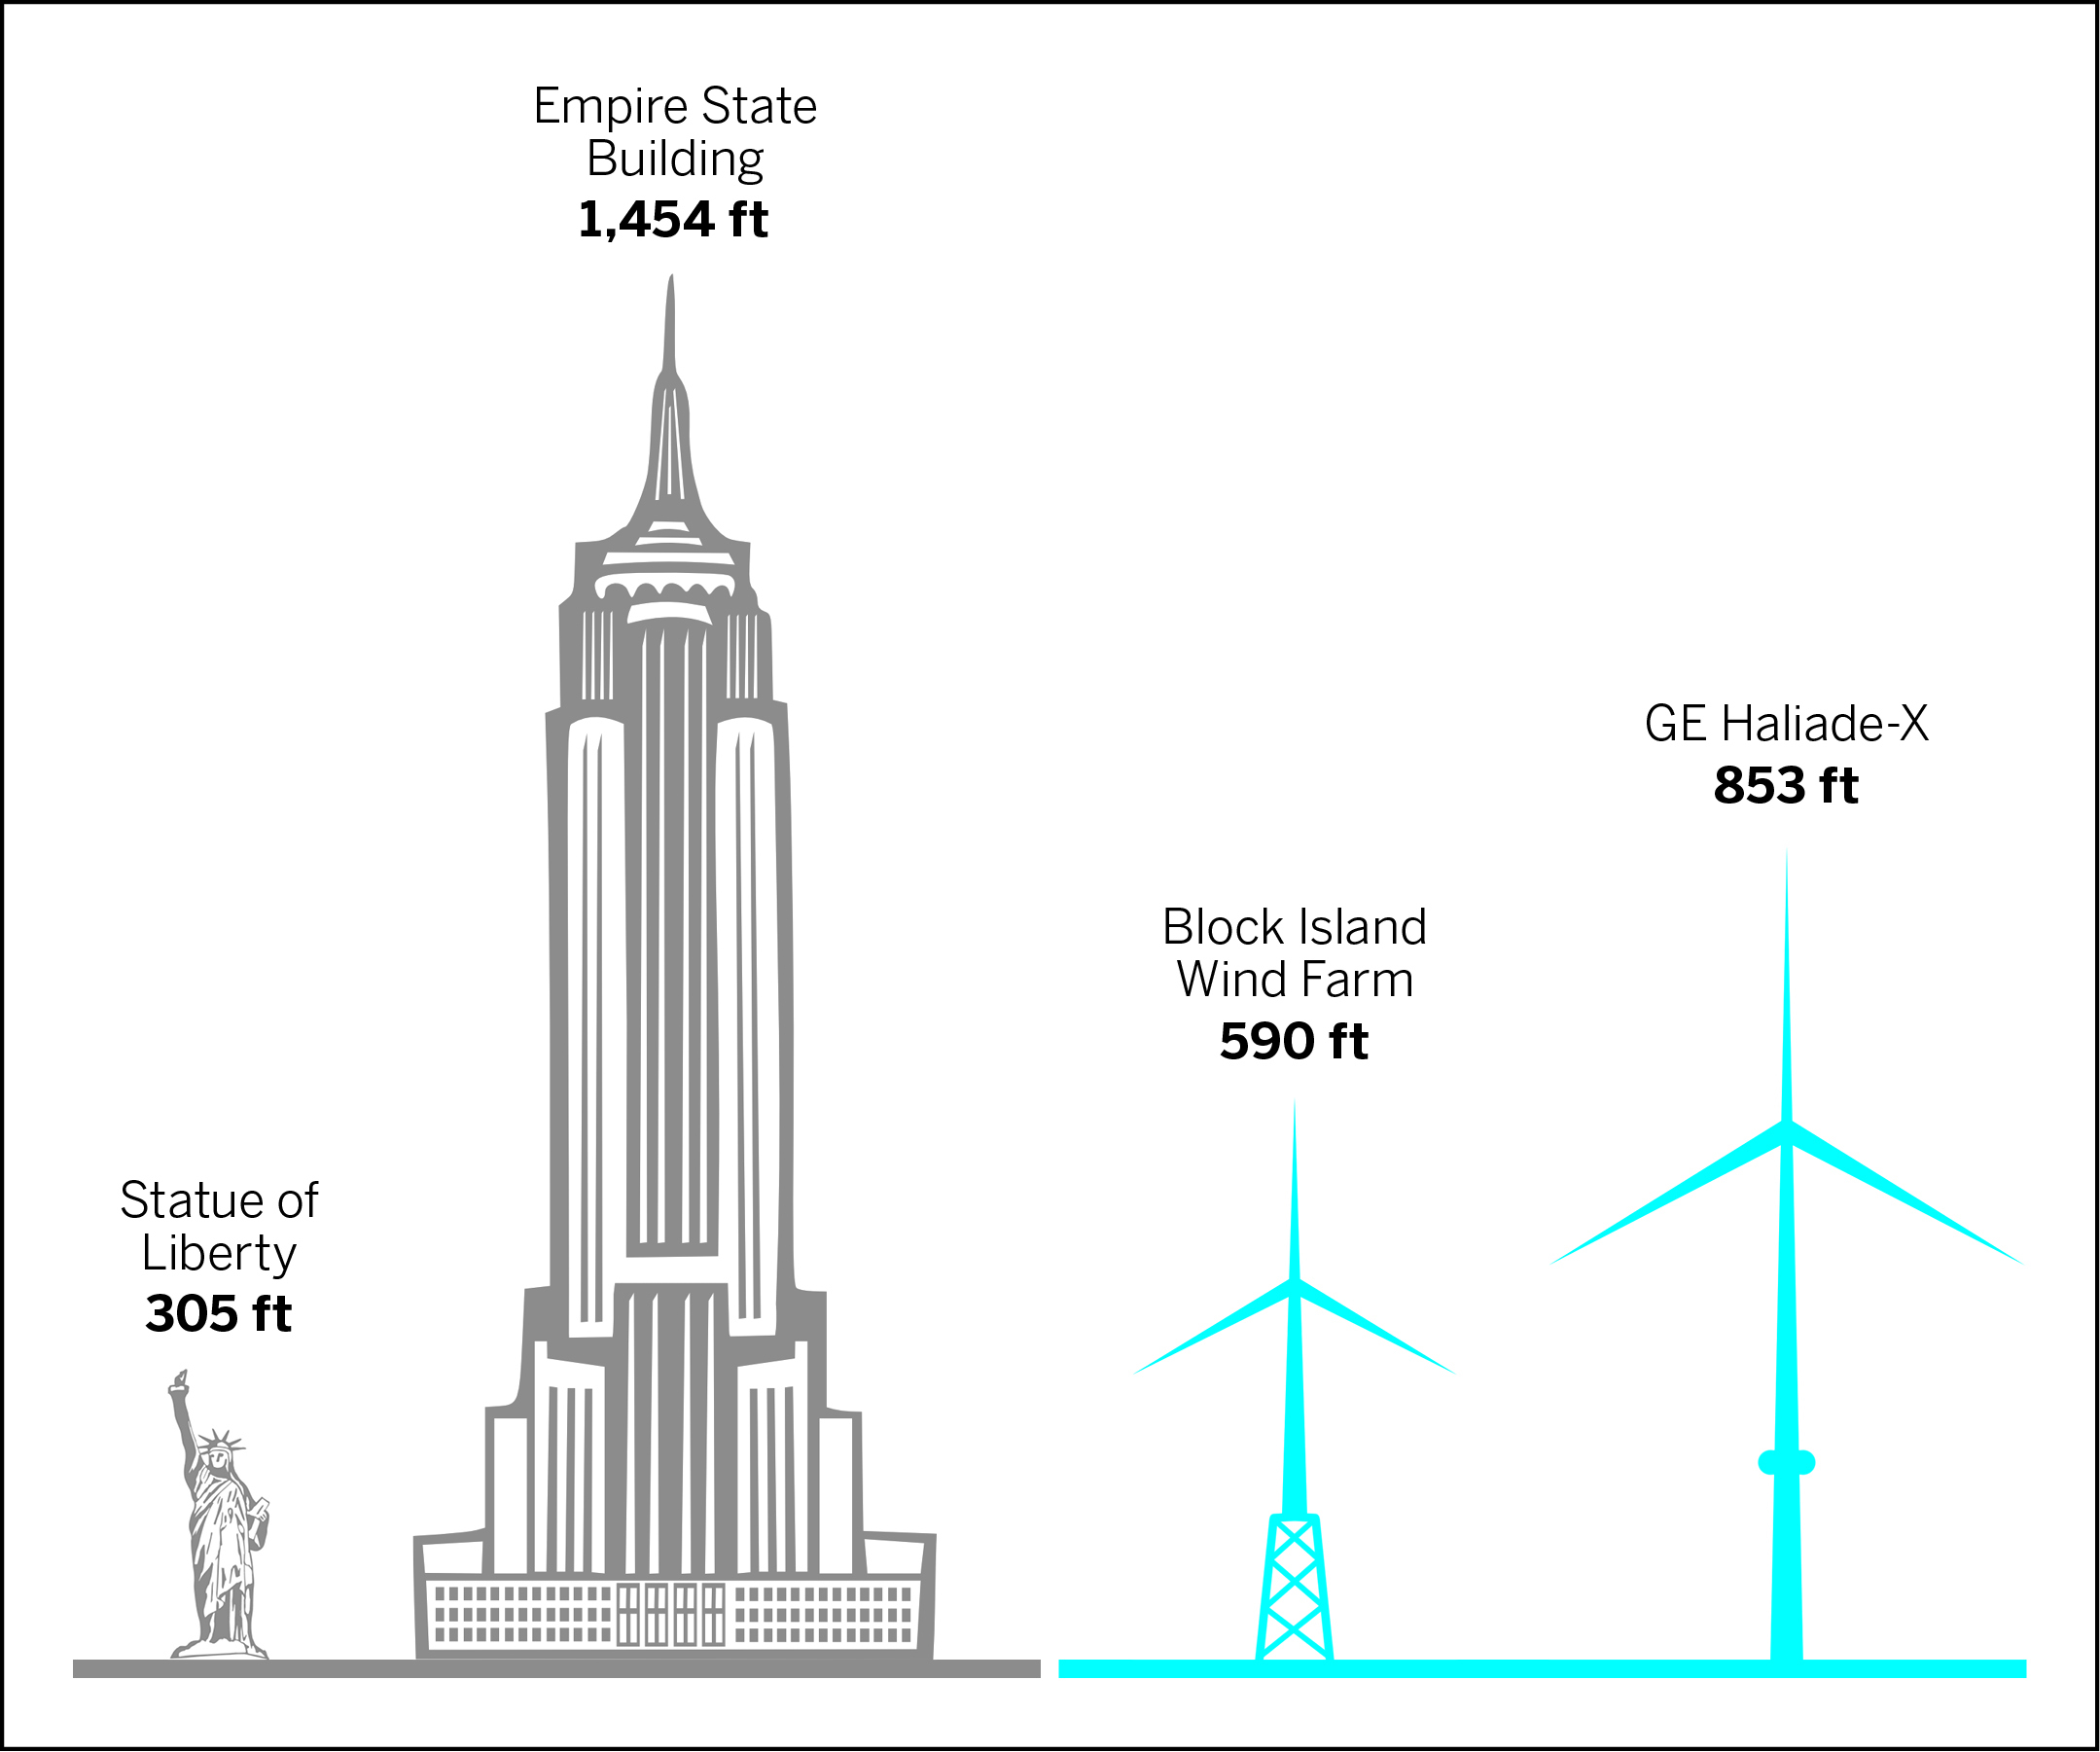 Ørsted has announced that the South Fork Wind Farm will be comprised of no more than 12 turbines, rather than as many as 15, as originally planned, but the turbines will be much larger than the ones built off Block Island in 2016 and visible from Montauk's shores on clear days.